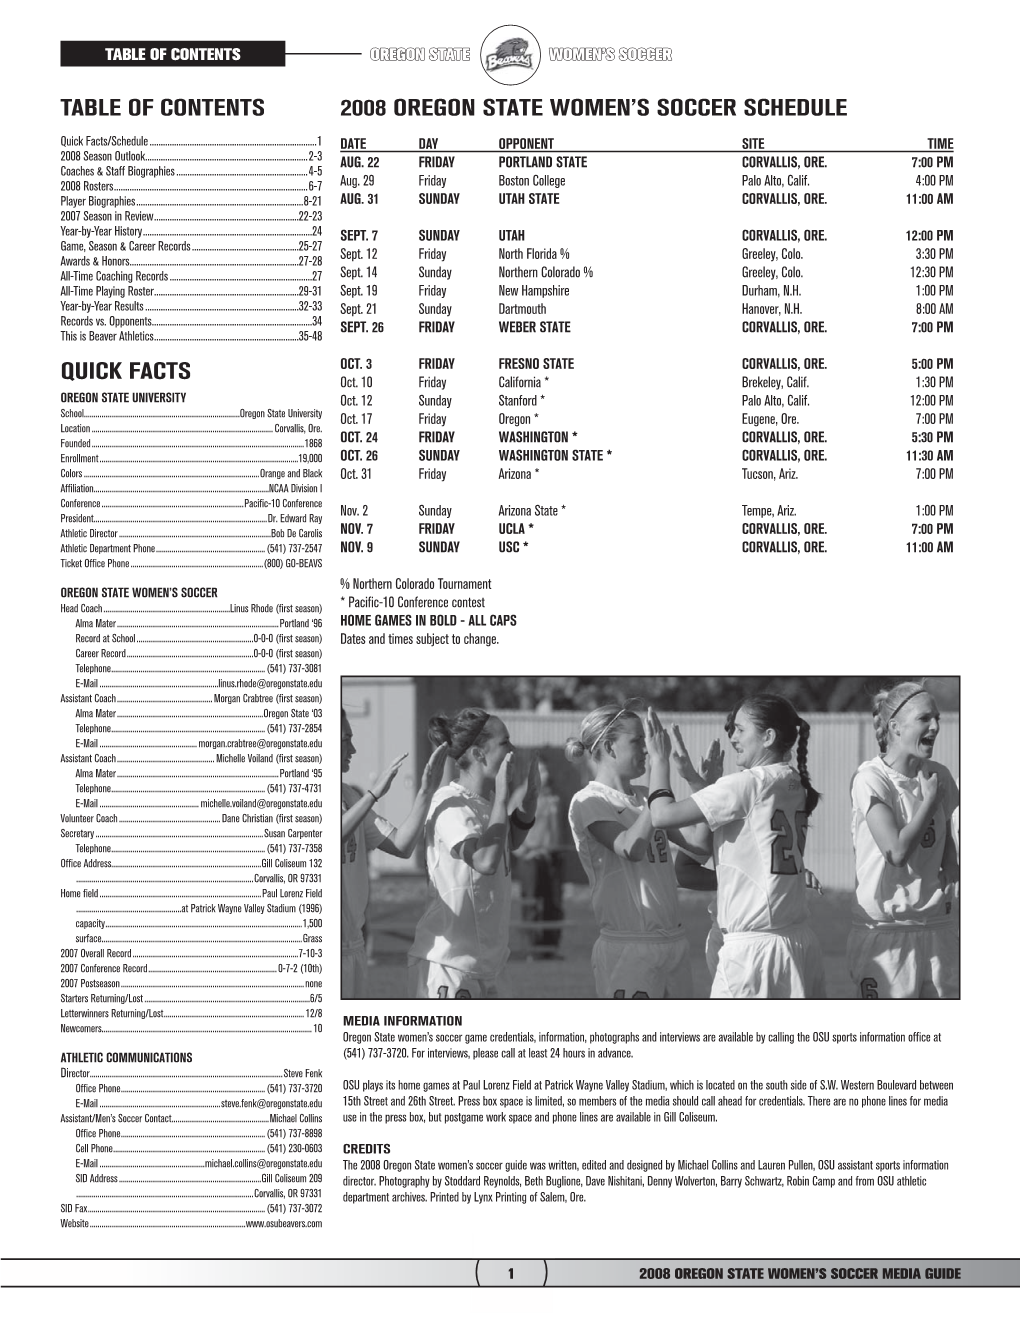 Table of Contents Quick Facts 2008 Oregon State Women's